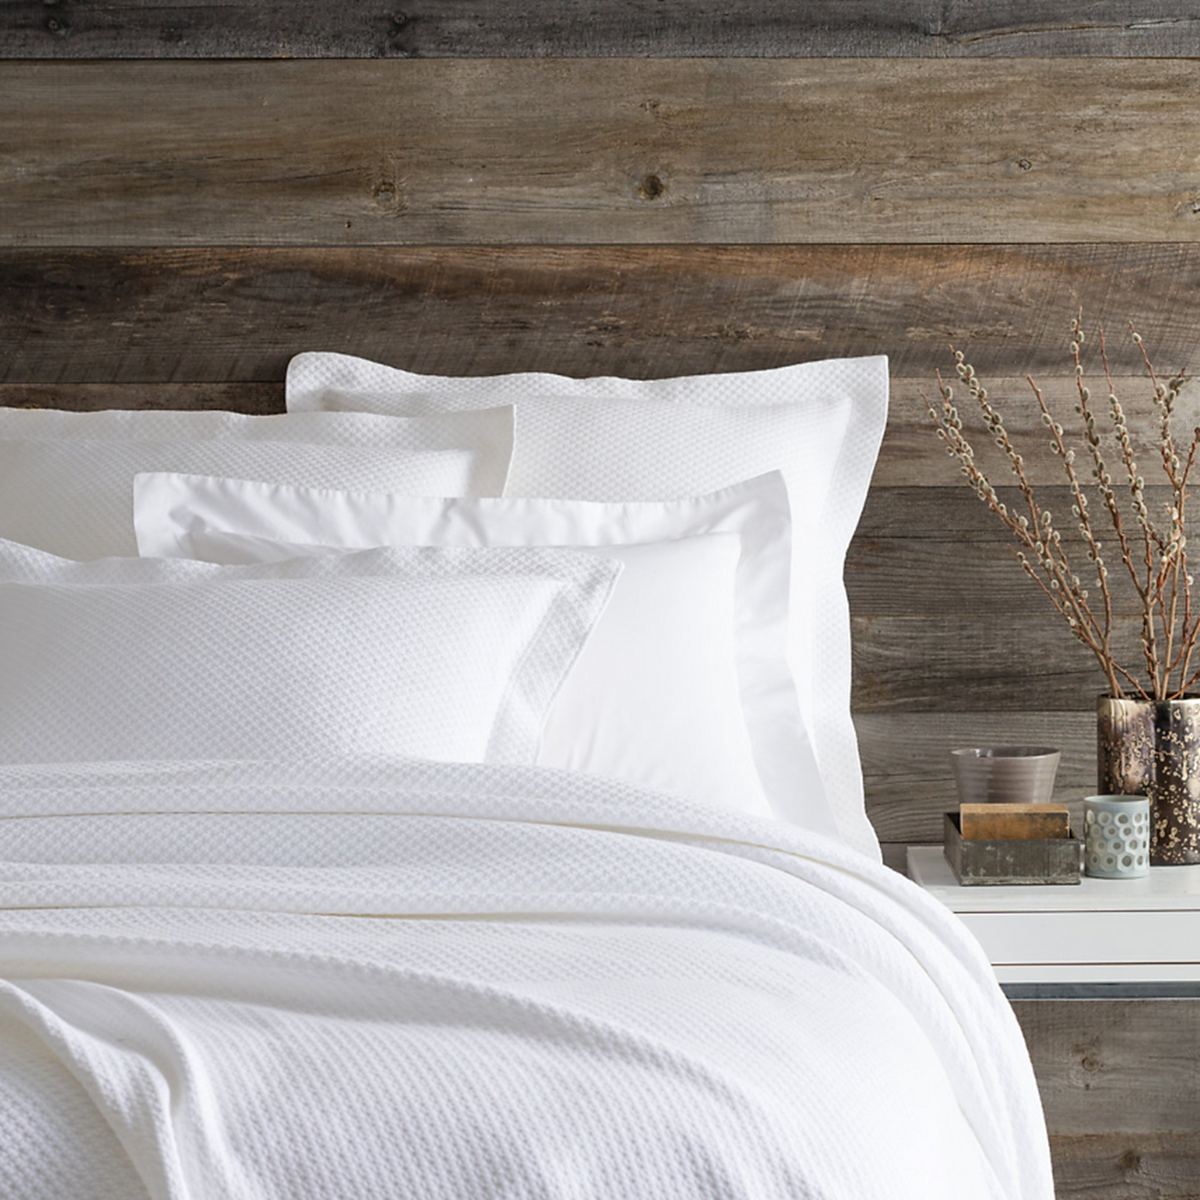 Bed Dressed in Pine Cone Hill Petite Trellis Matelassé Coverlet and Shams in White Color